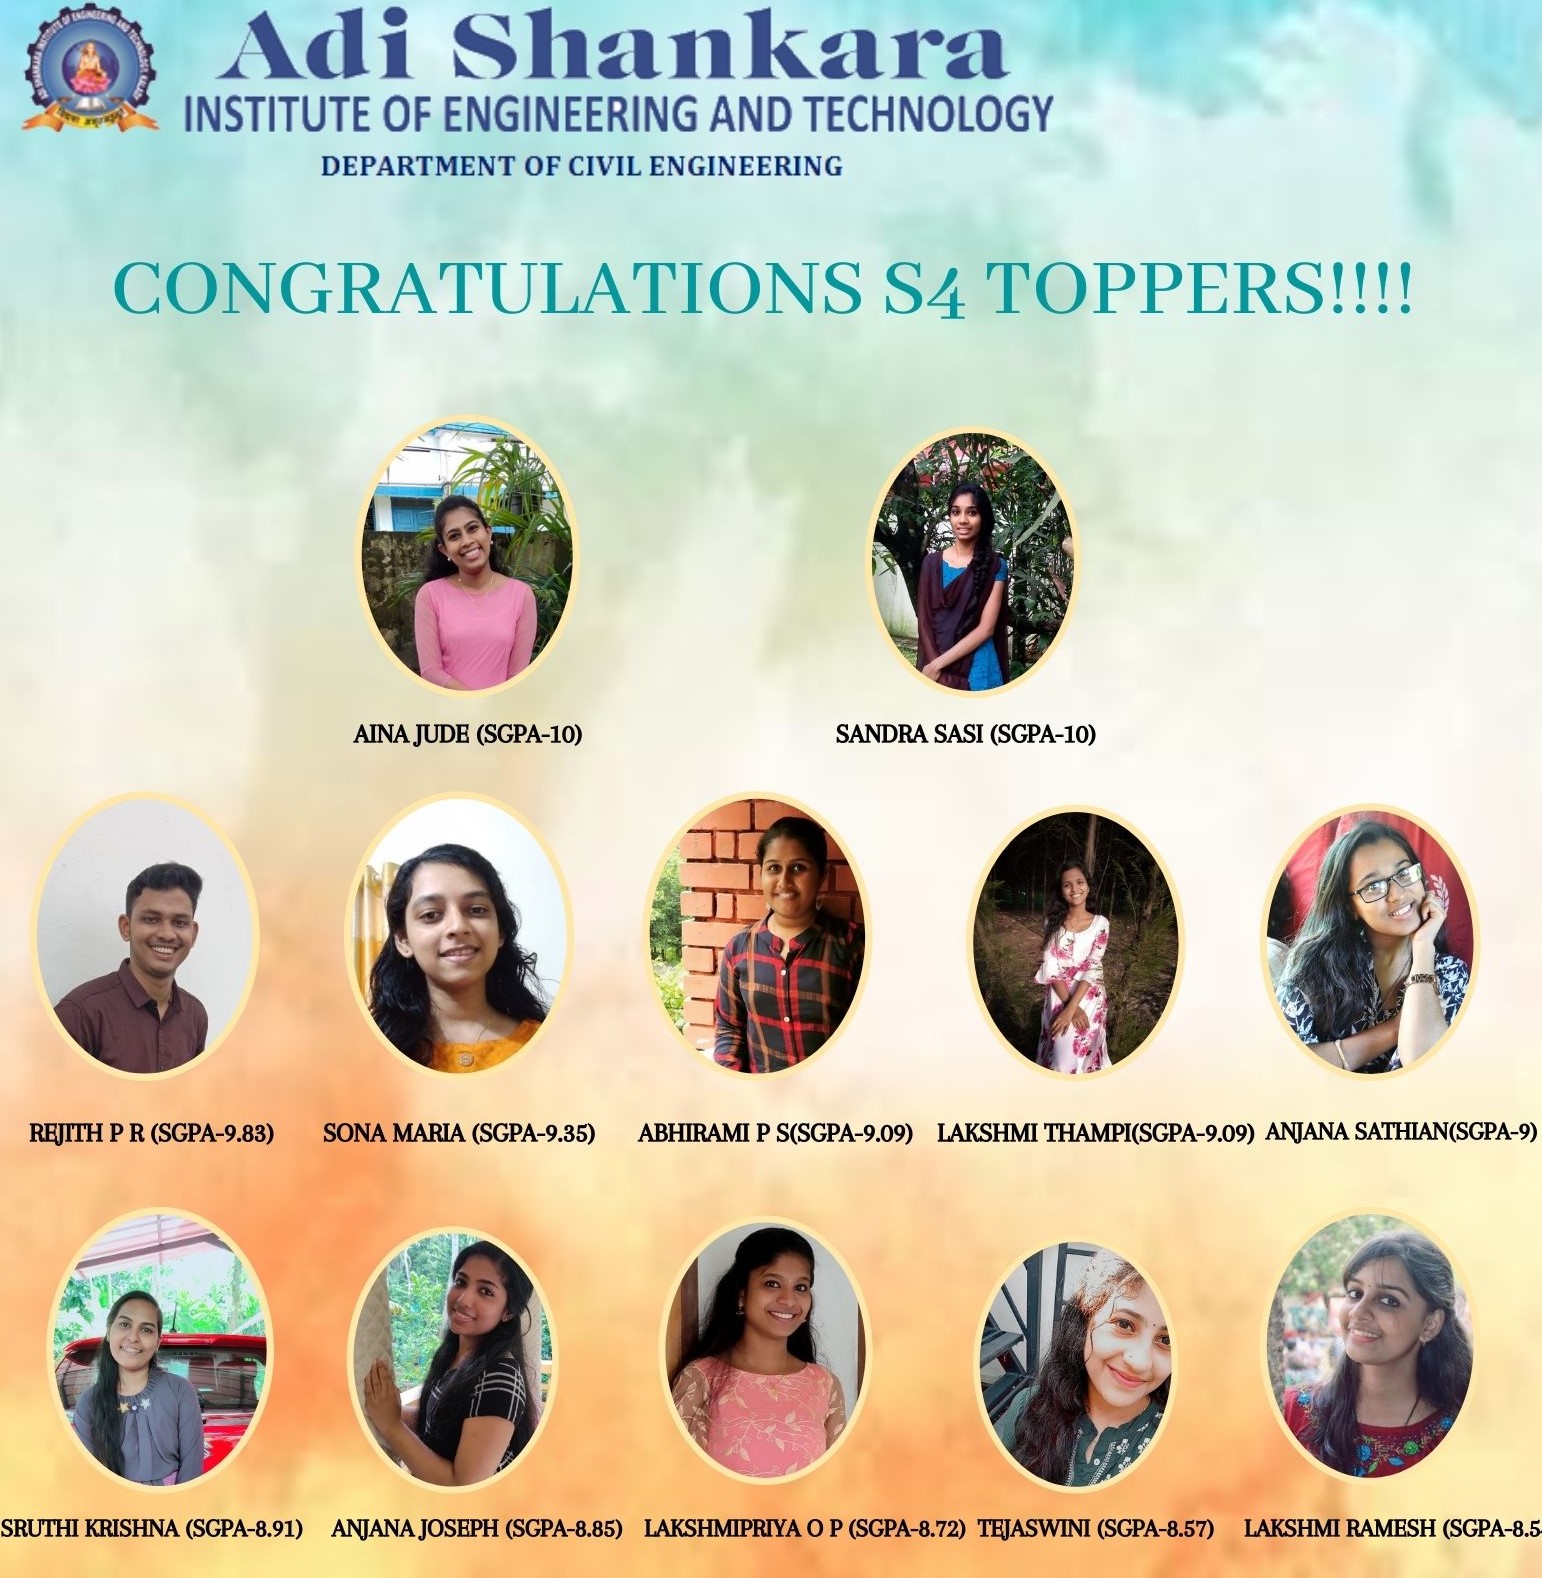 CONGRATULATIONS TOPPERS